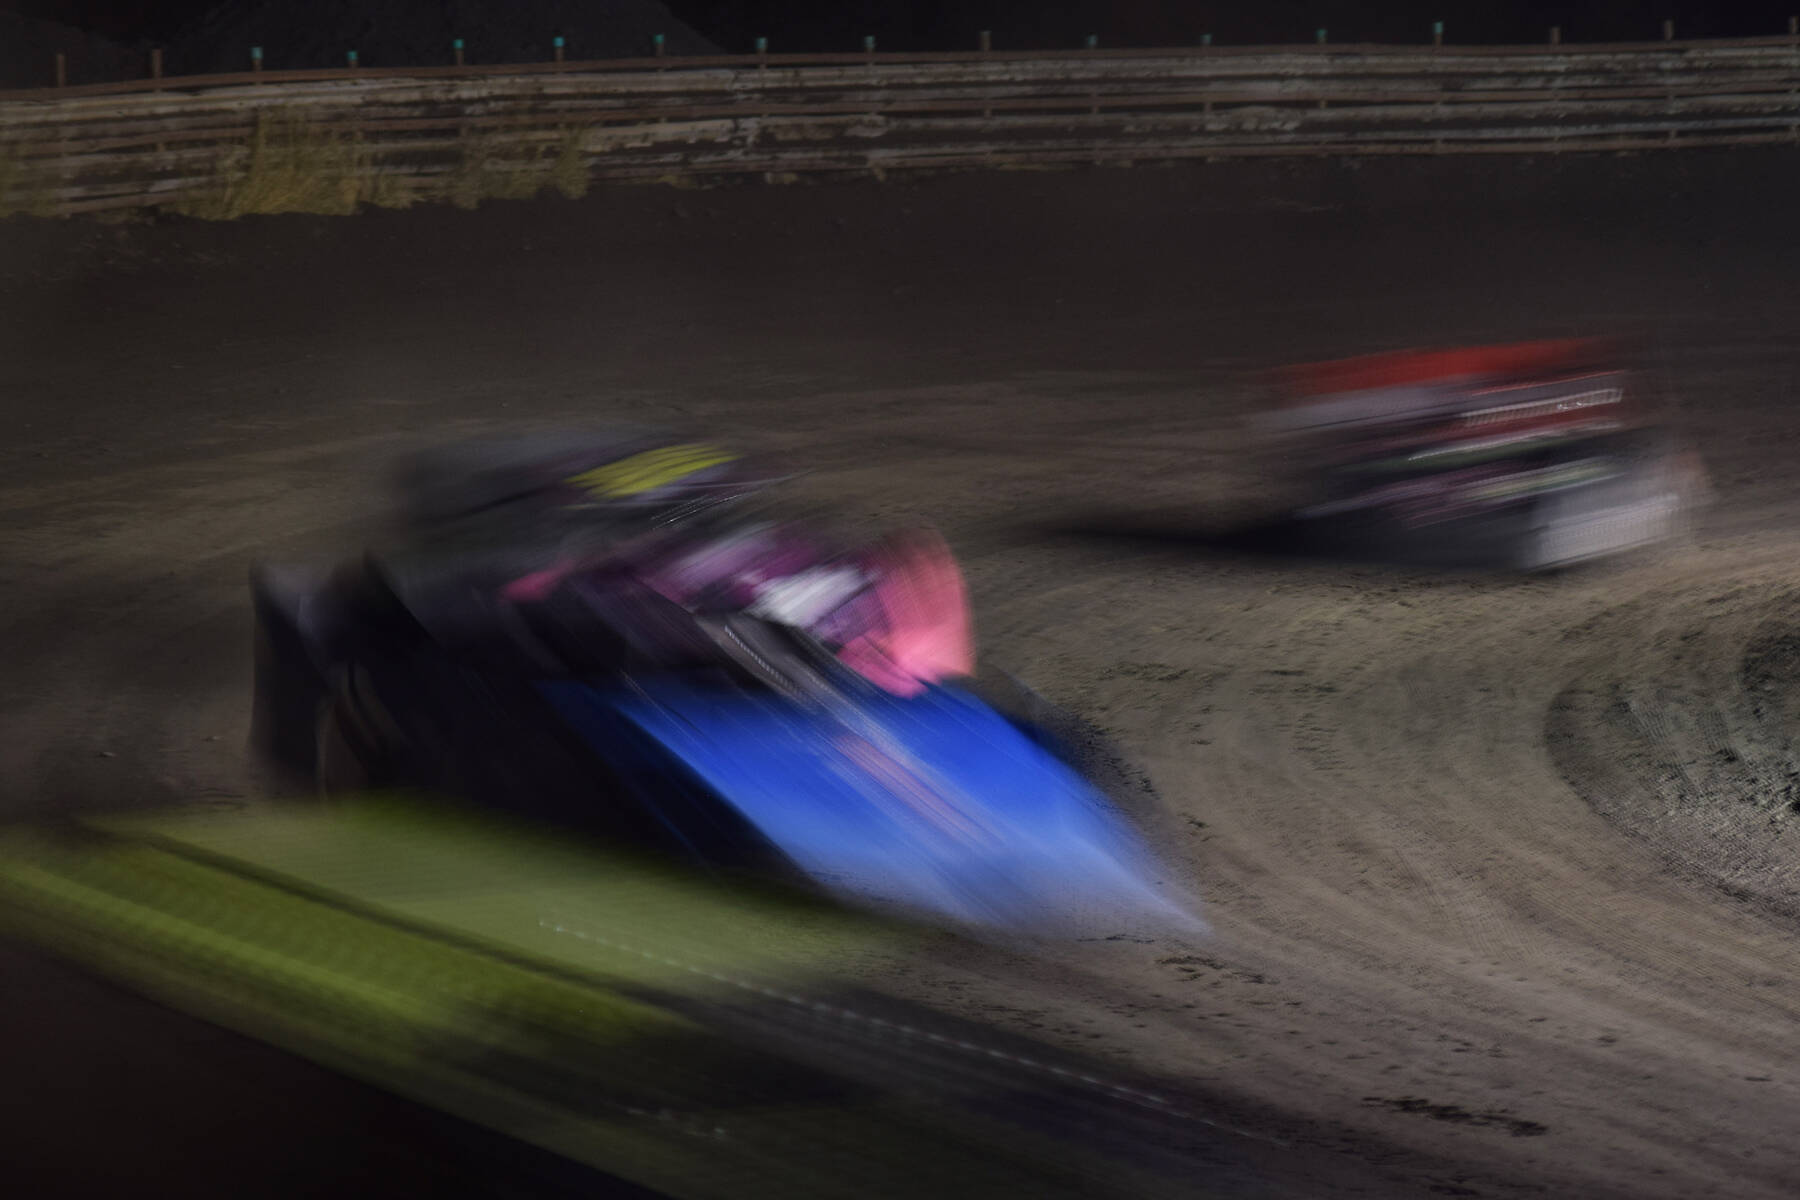 The field of Late Models slide through a turn Friday, Sept. 6, 2019, at Twin City Raceway in Kenai, Alaska. (Photo by Joey Klecka/Peninsula Clarion)